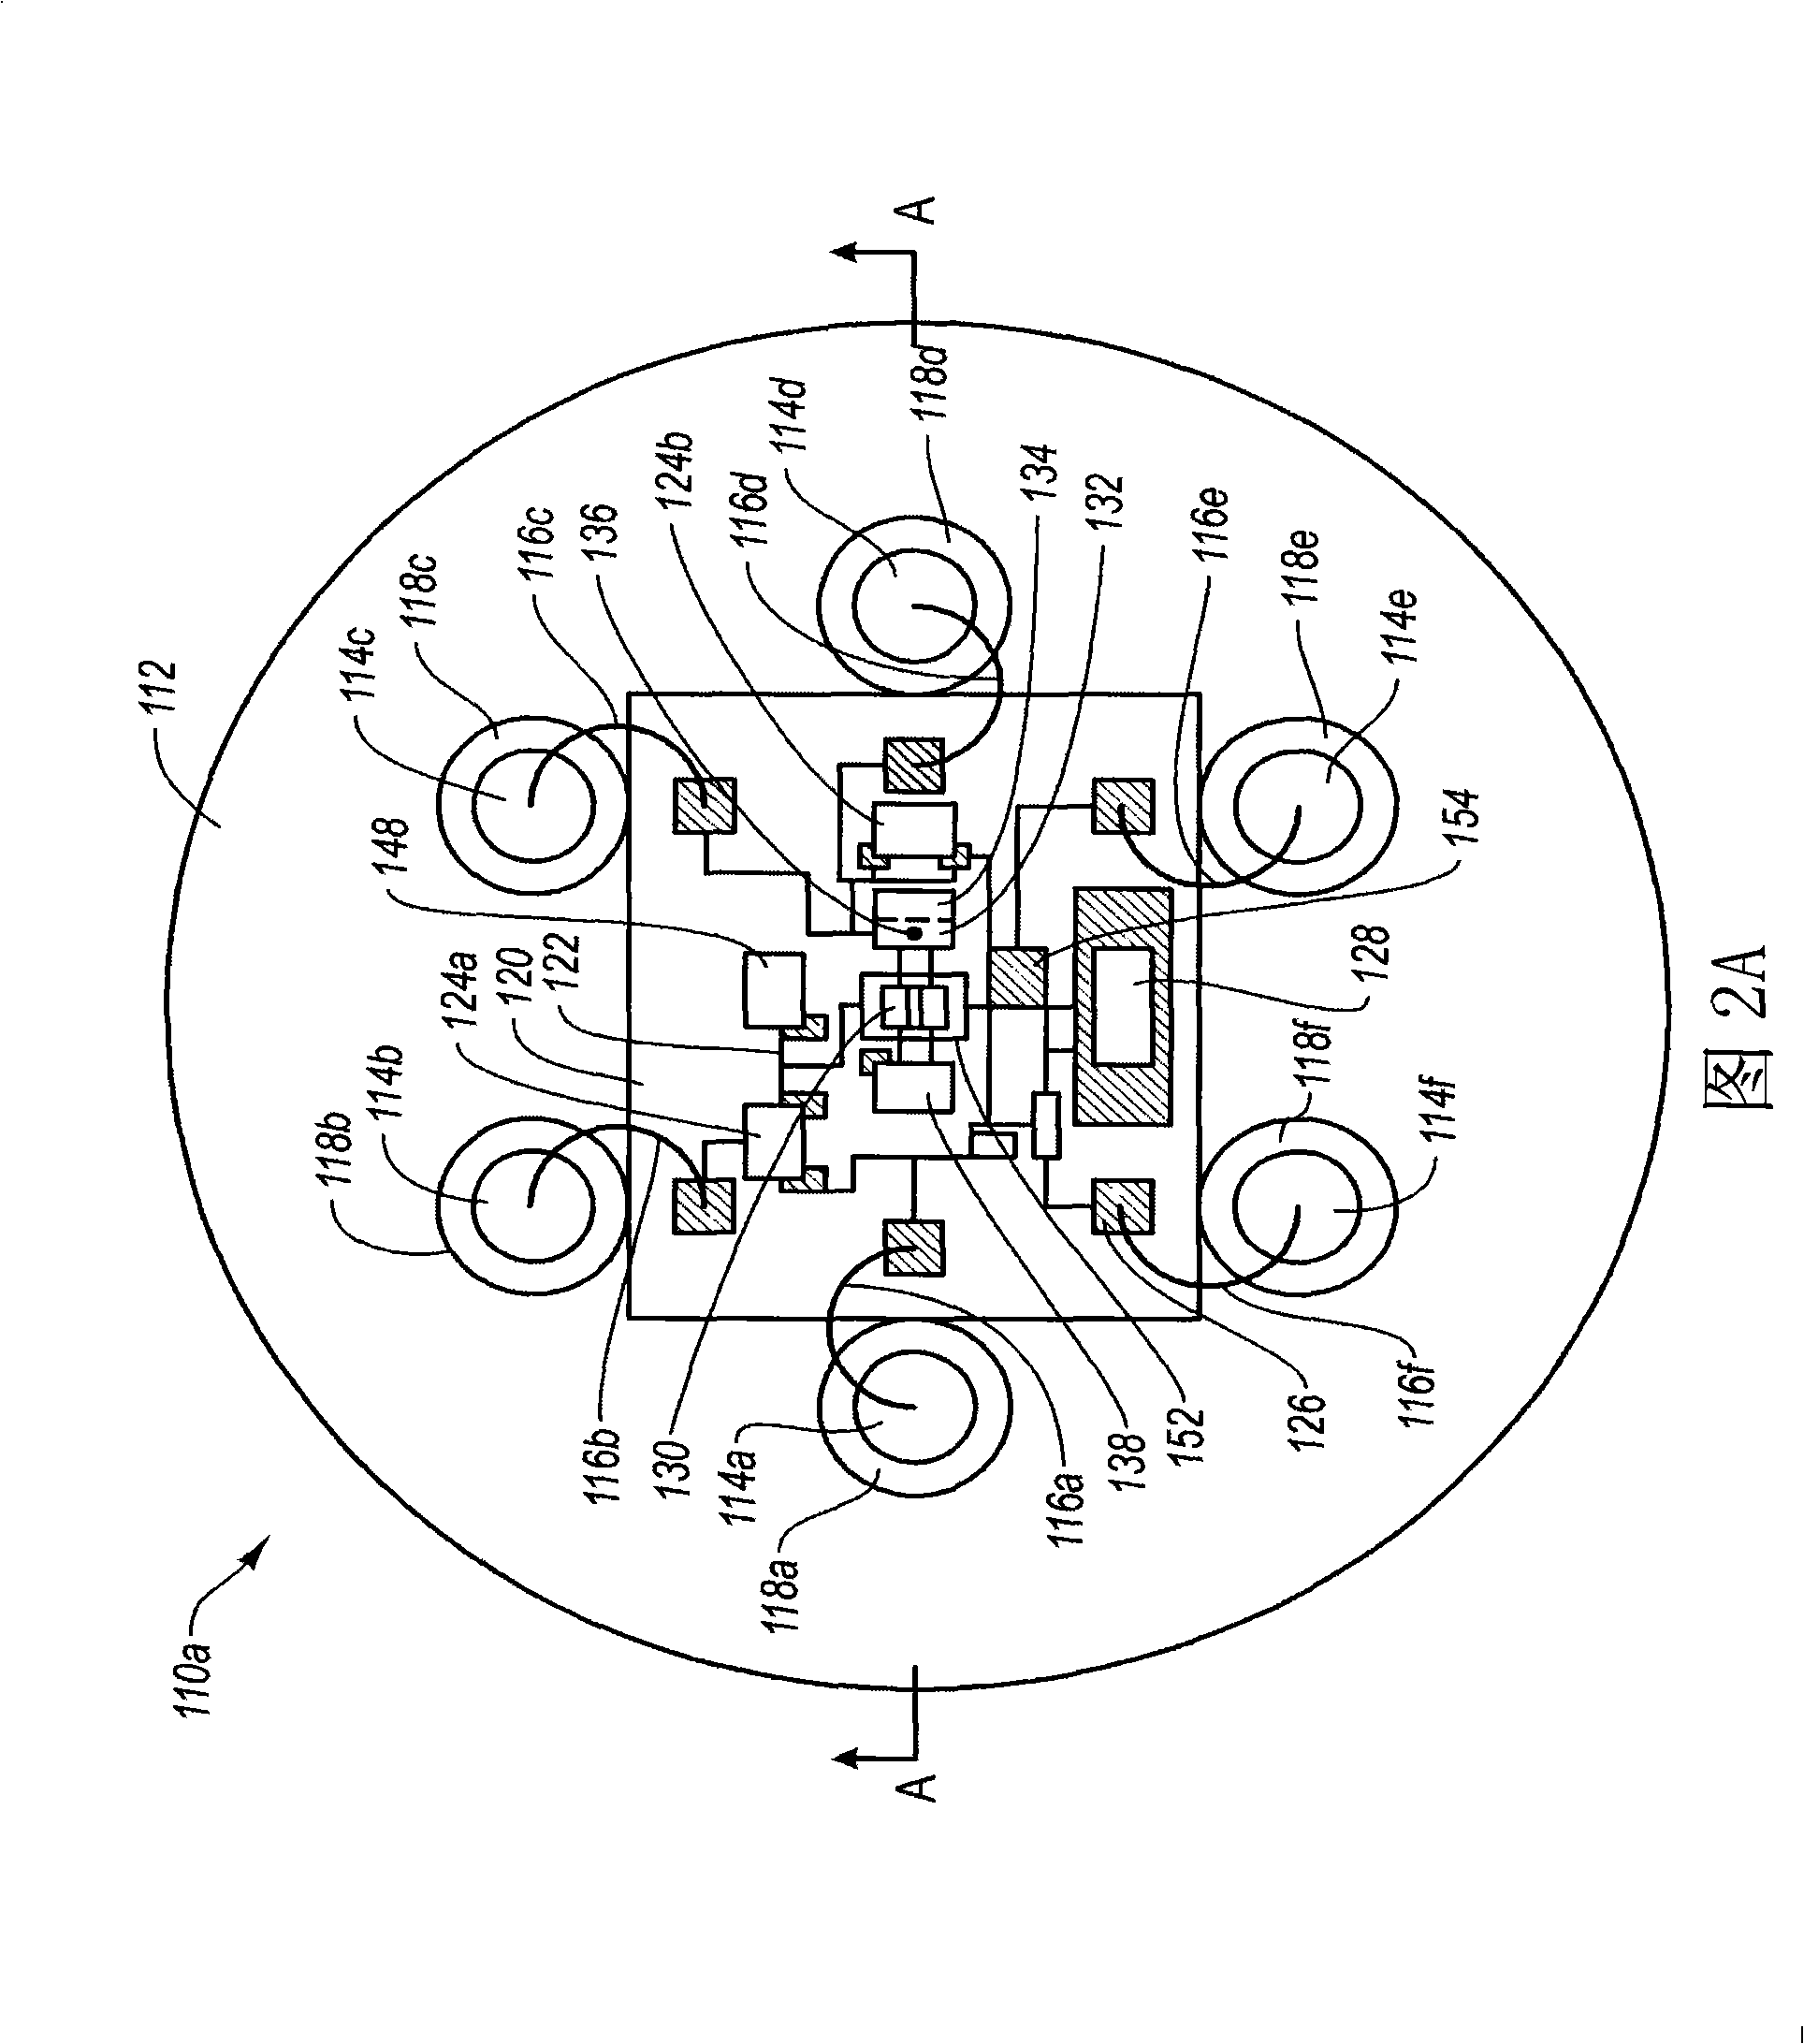 Modular transistor outline can with internal components